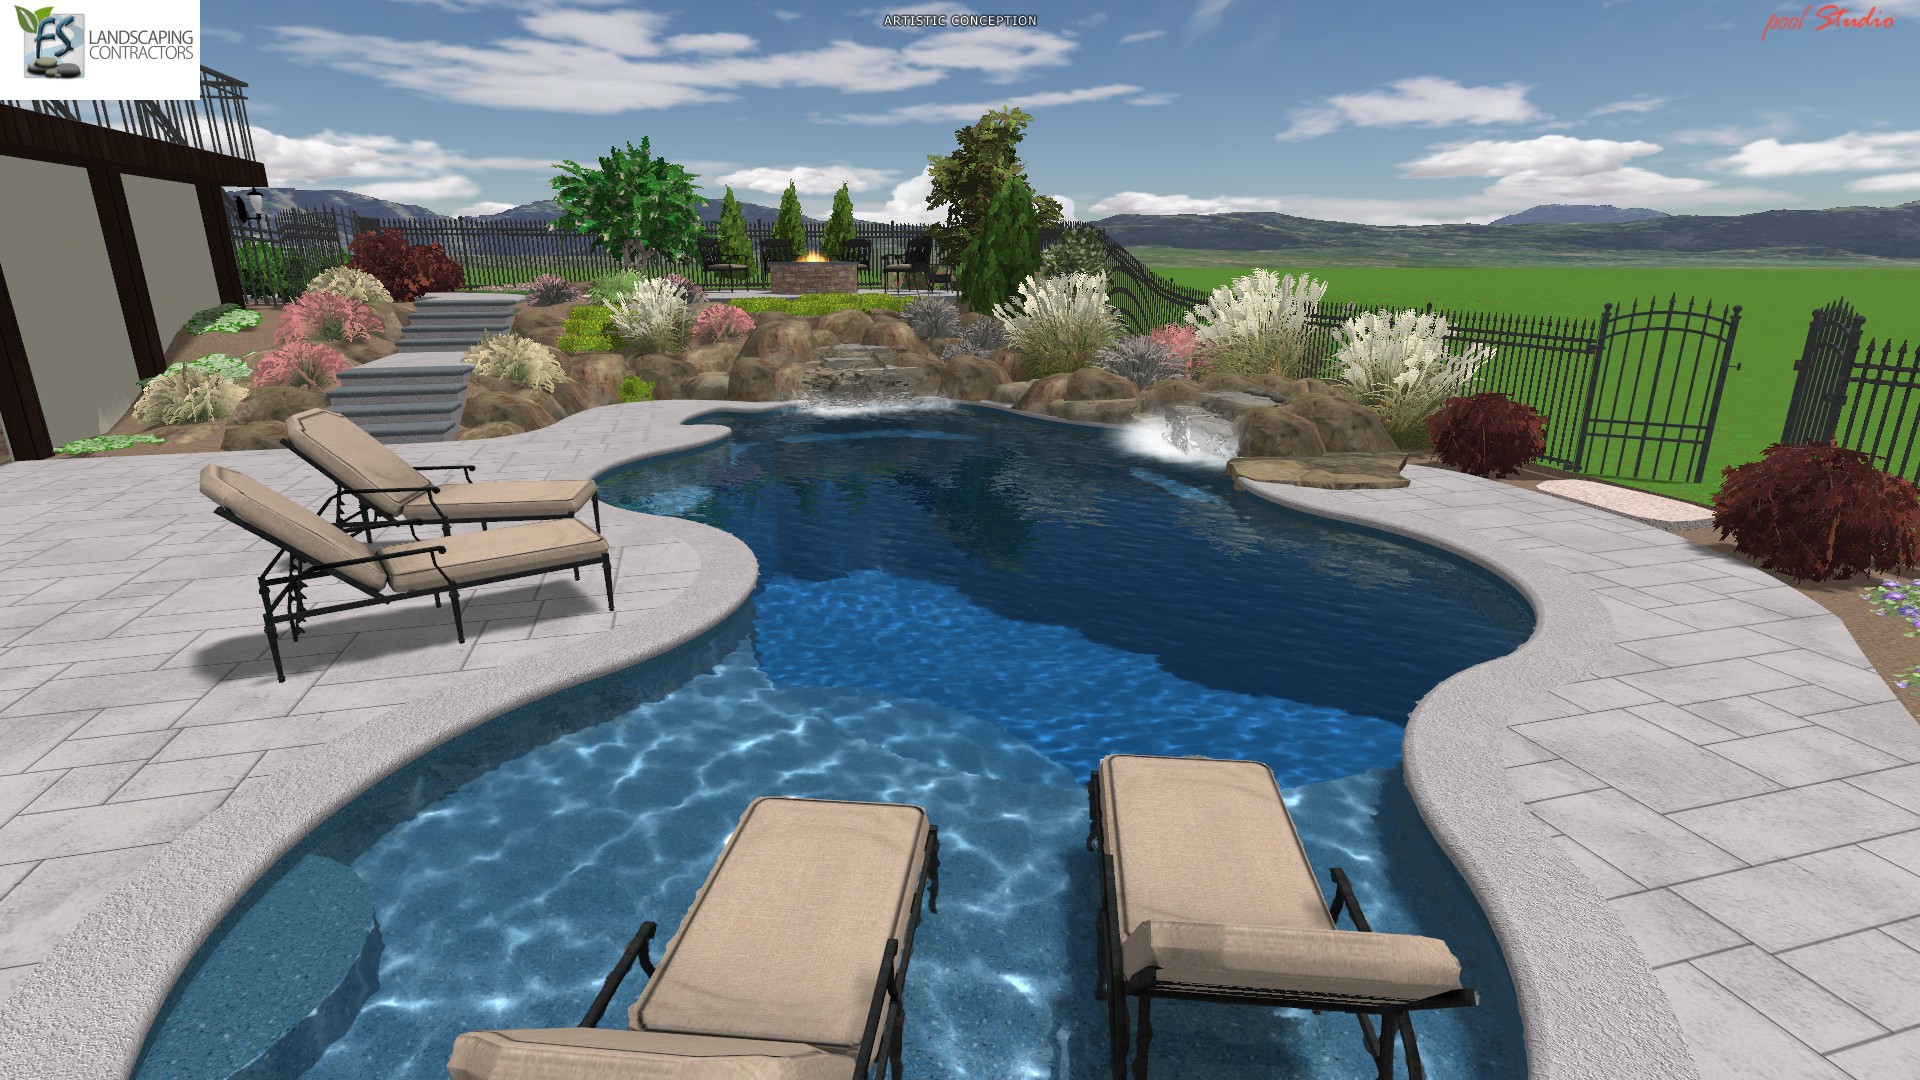 Landscaping Archive Landscaping Company NJ PA Custom Pools